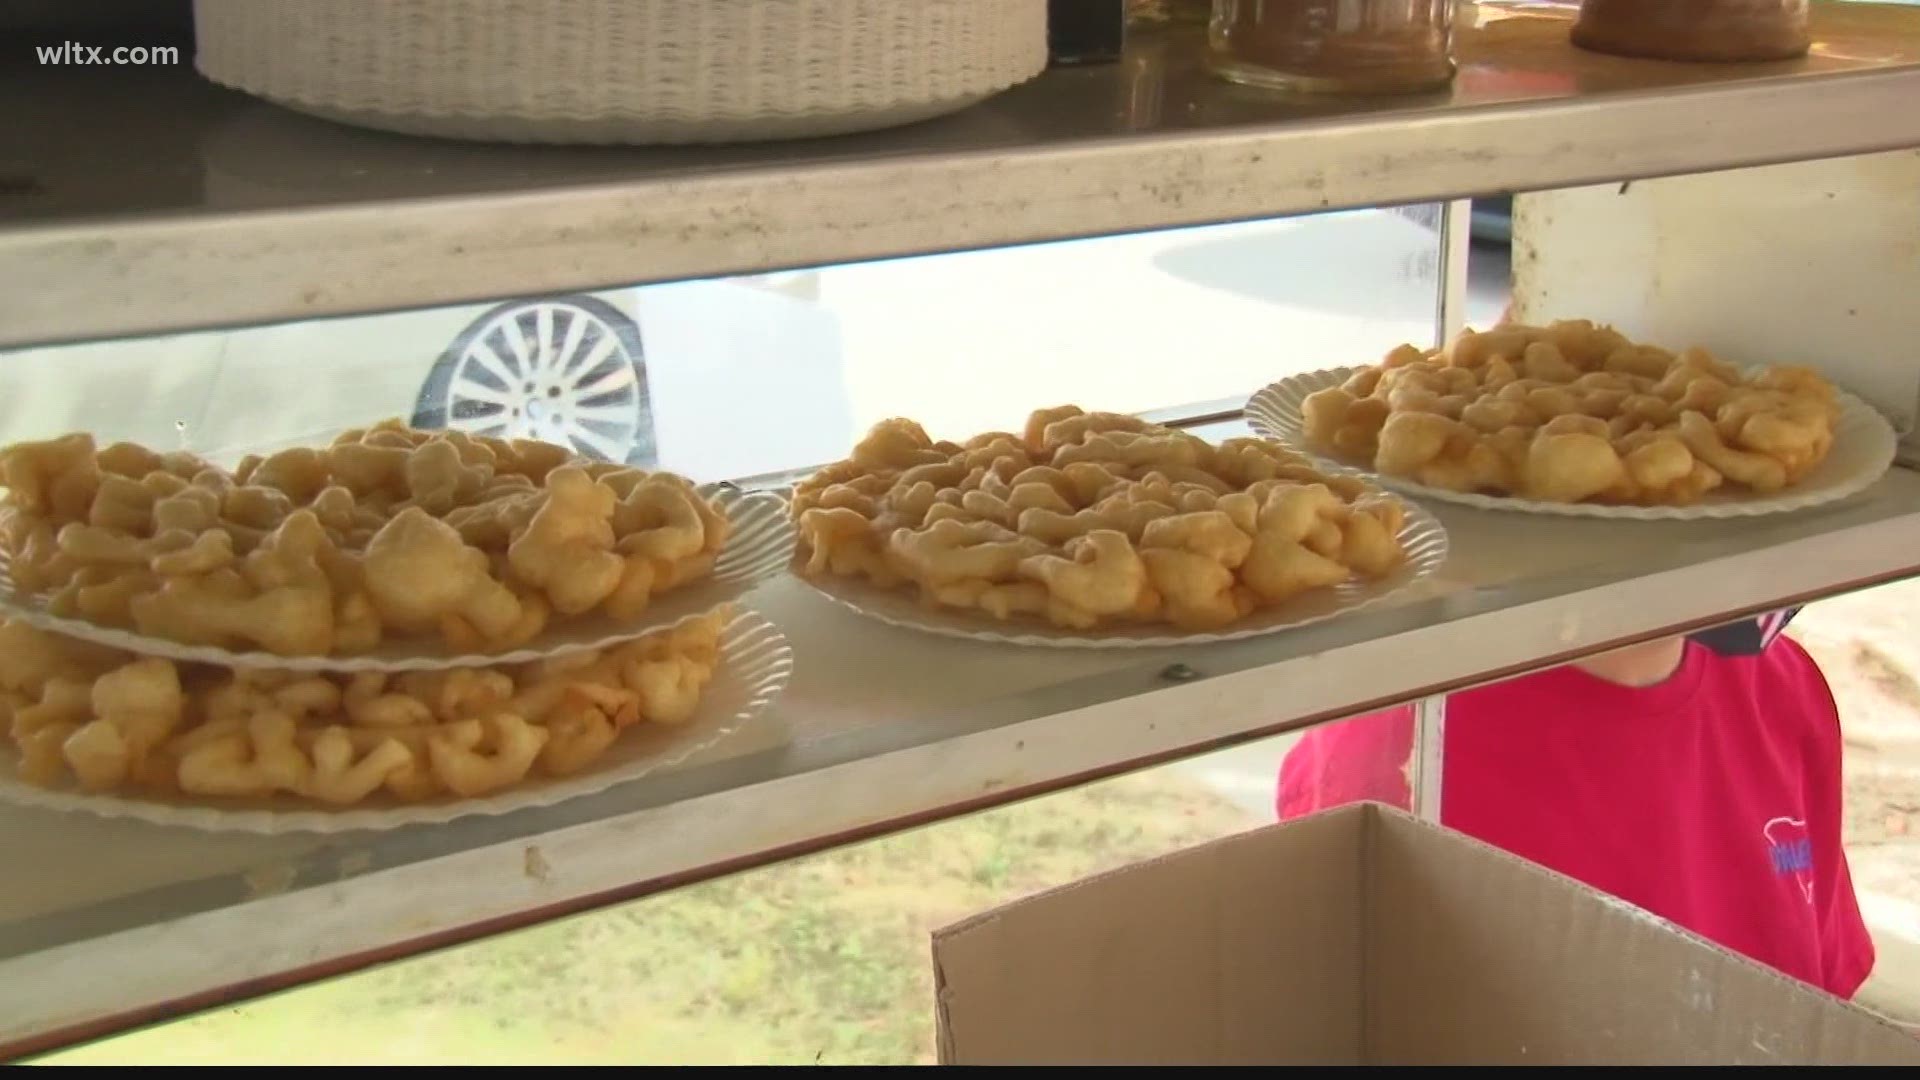 With the coronavirus pandemic cancelling many events in 2020, some food vendors are getting a chance to open up for the first time this year thanks to the fair.